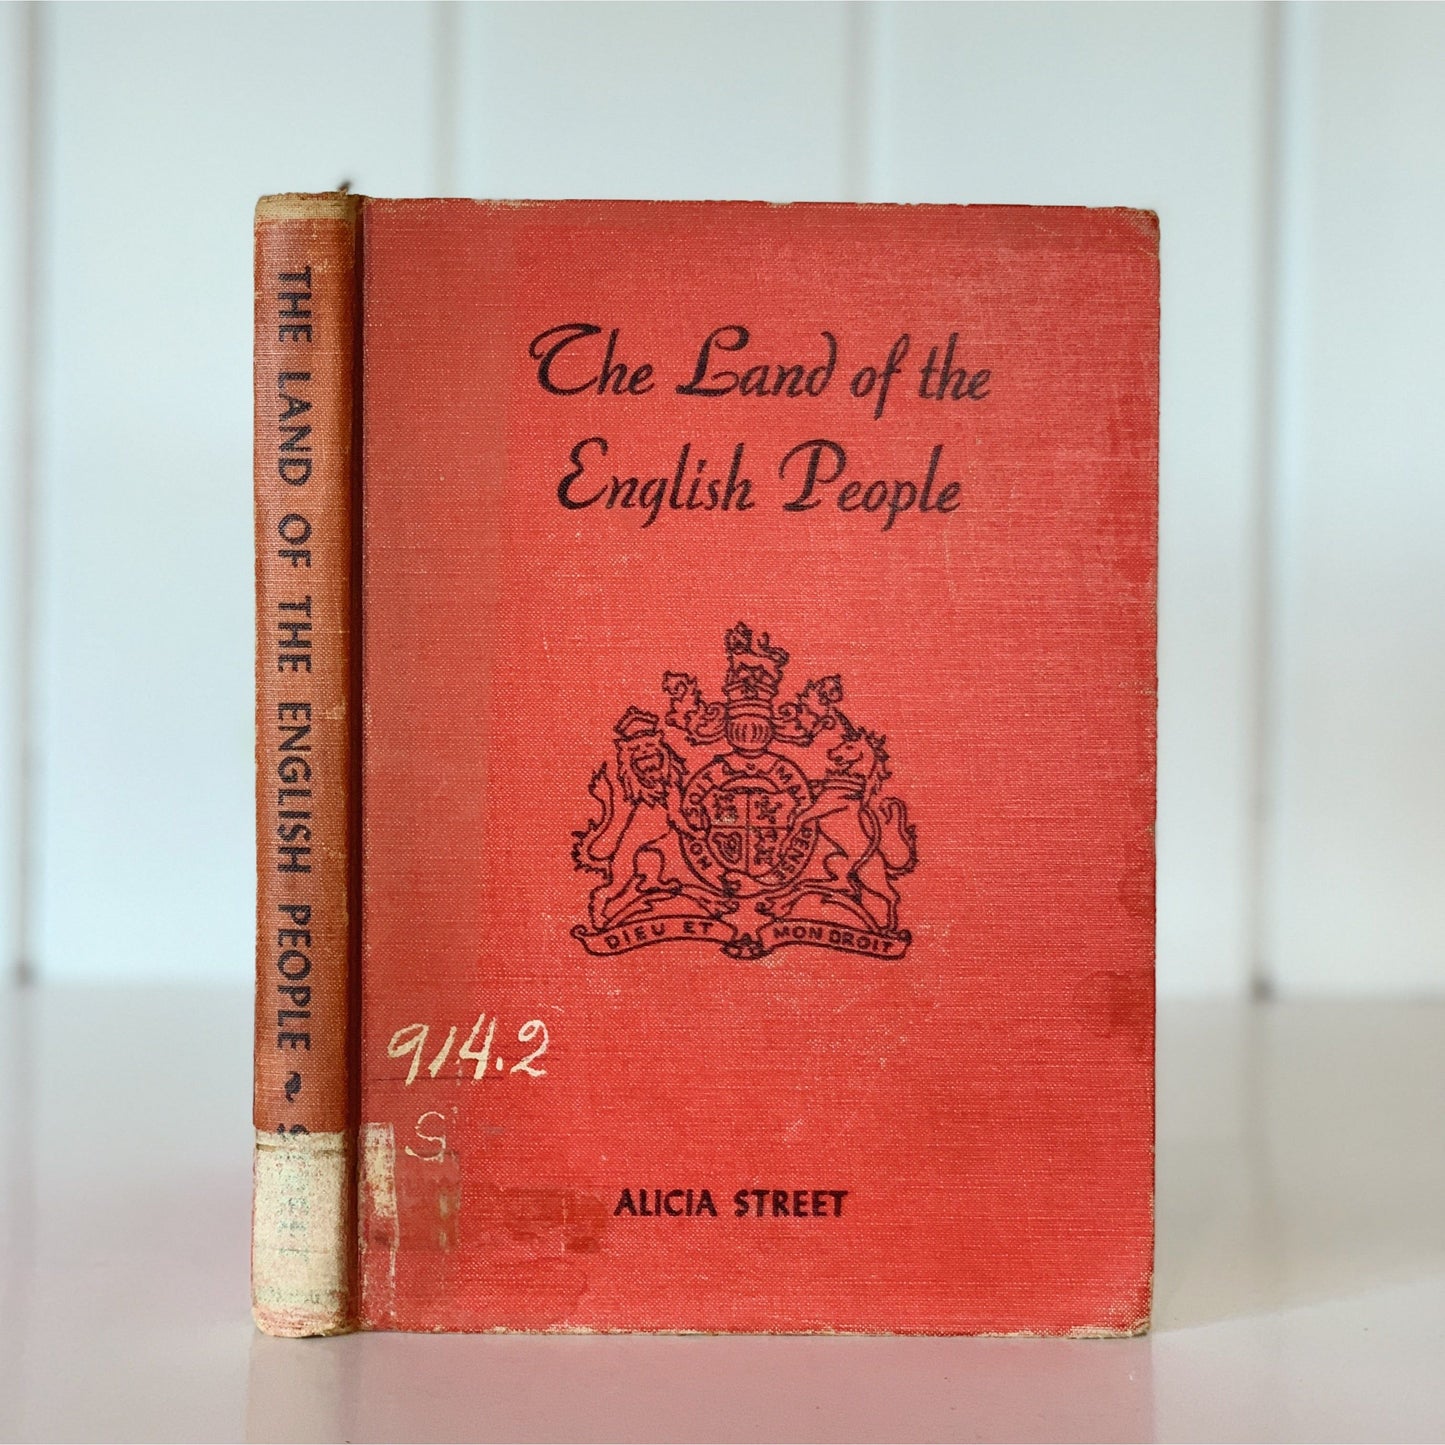 The Land of the English People, Alicia Street, 1963